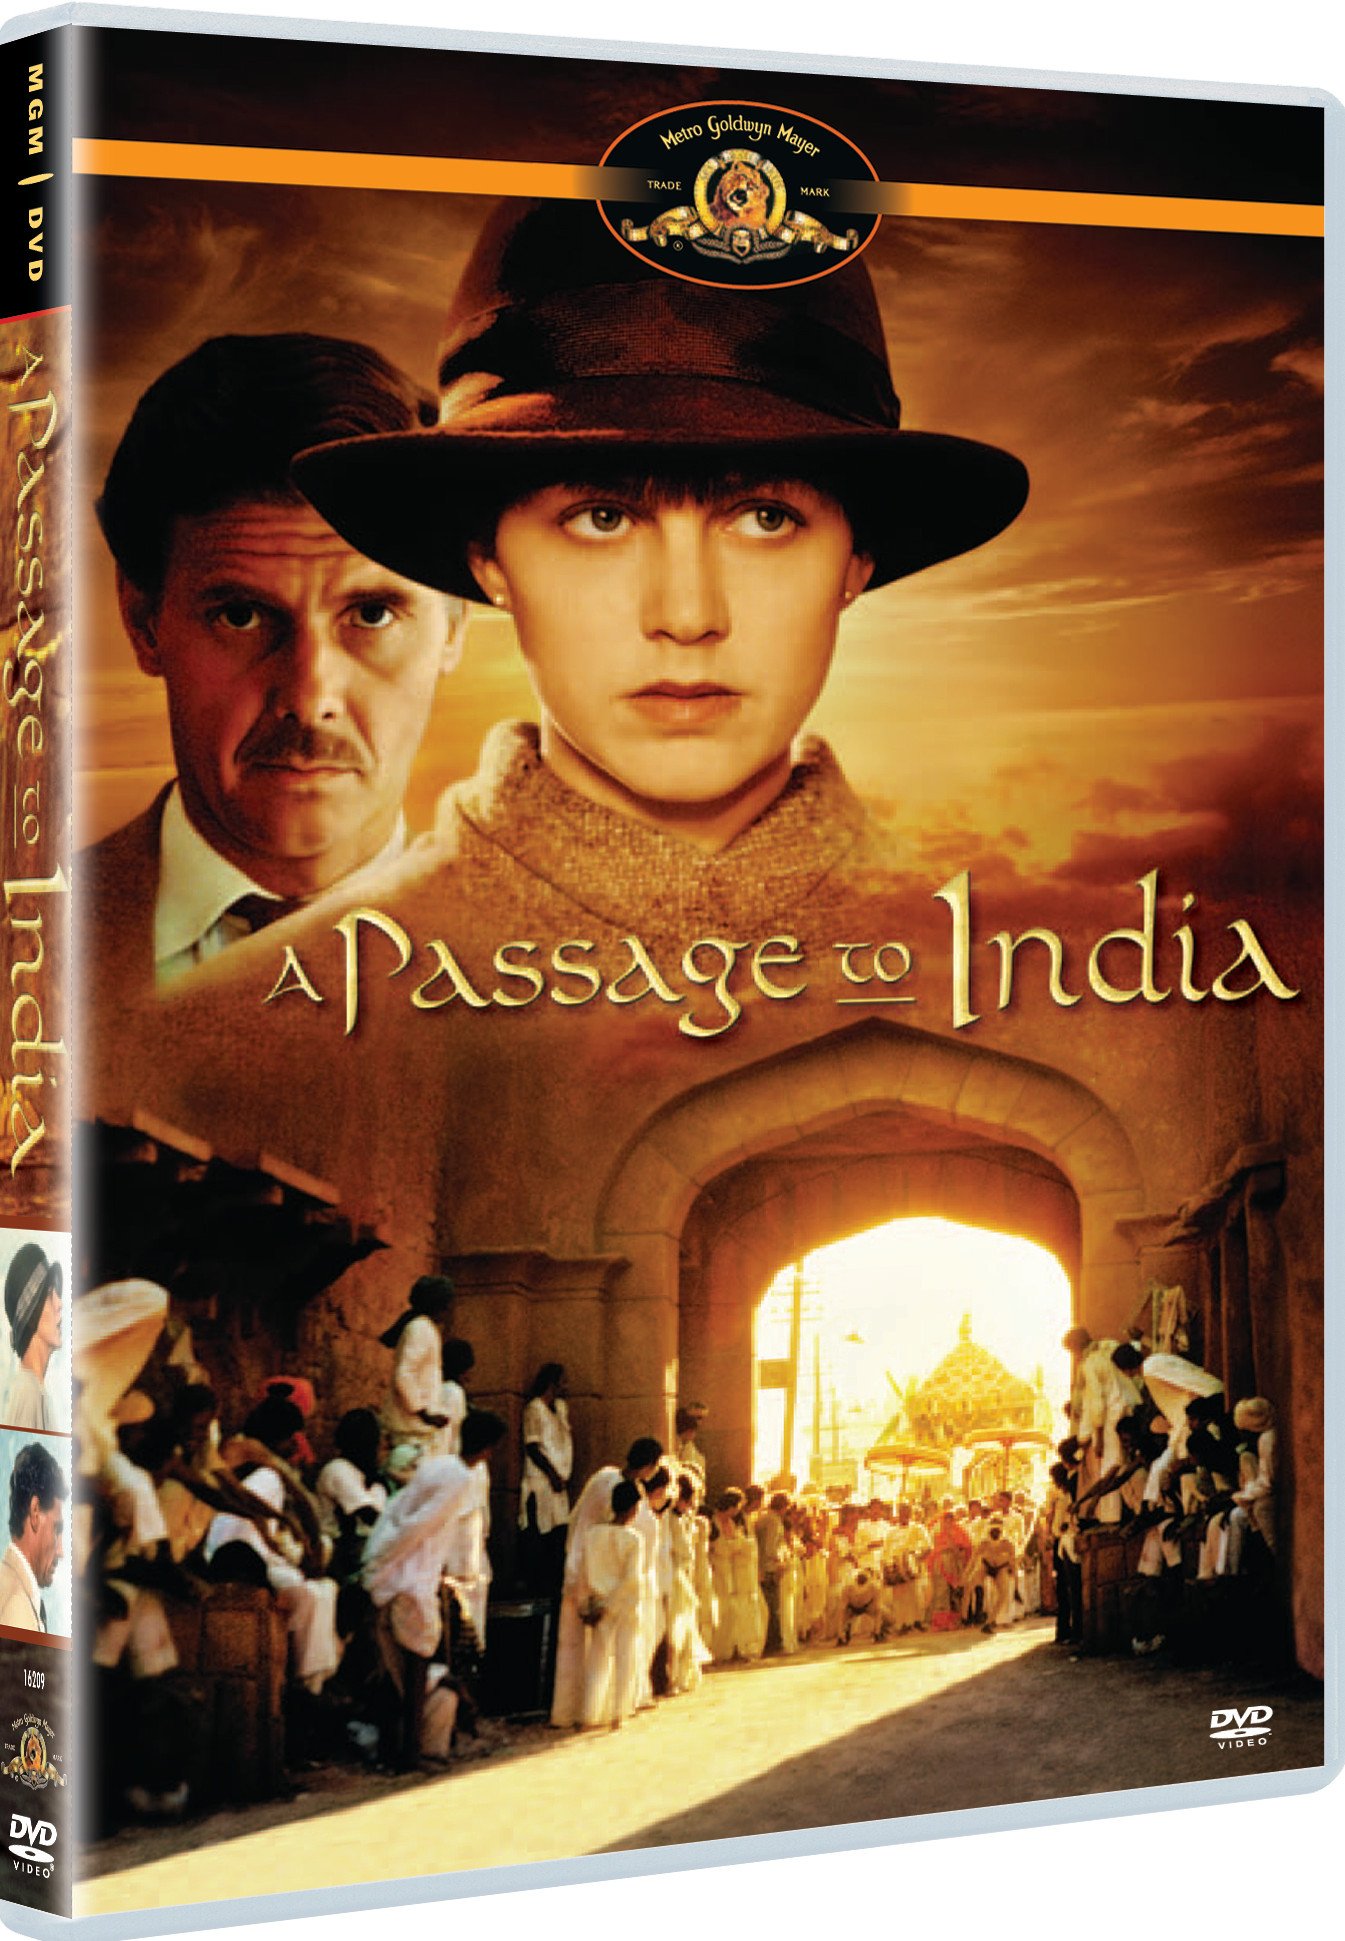 a-passage-to-india-movie-purchase-or-watch-online